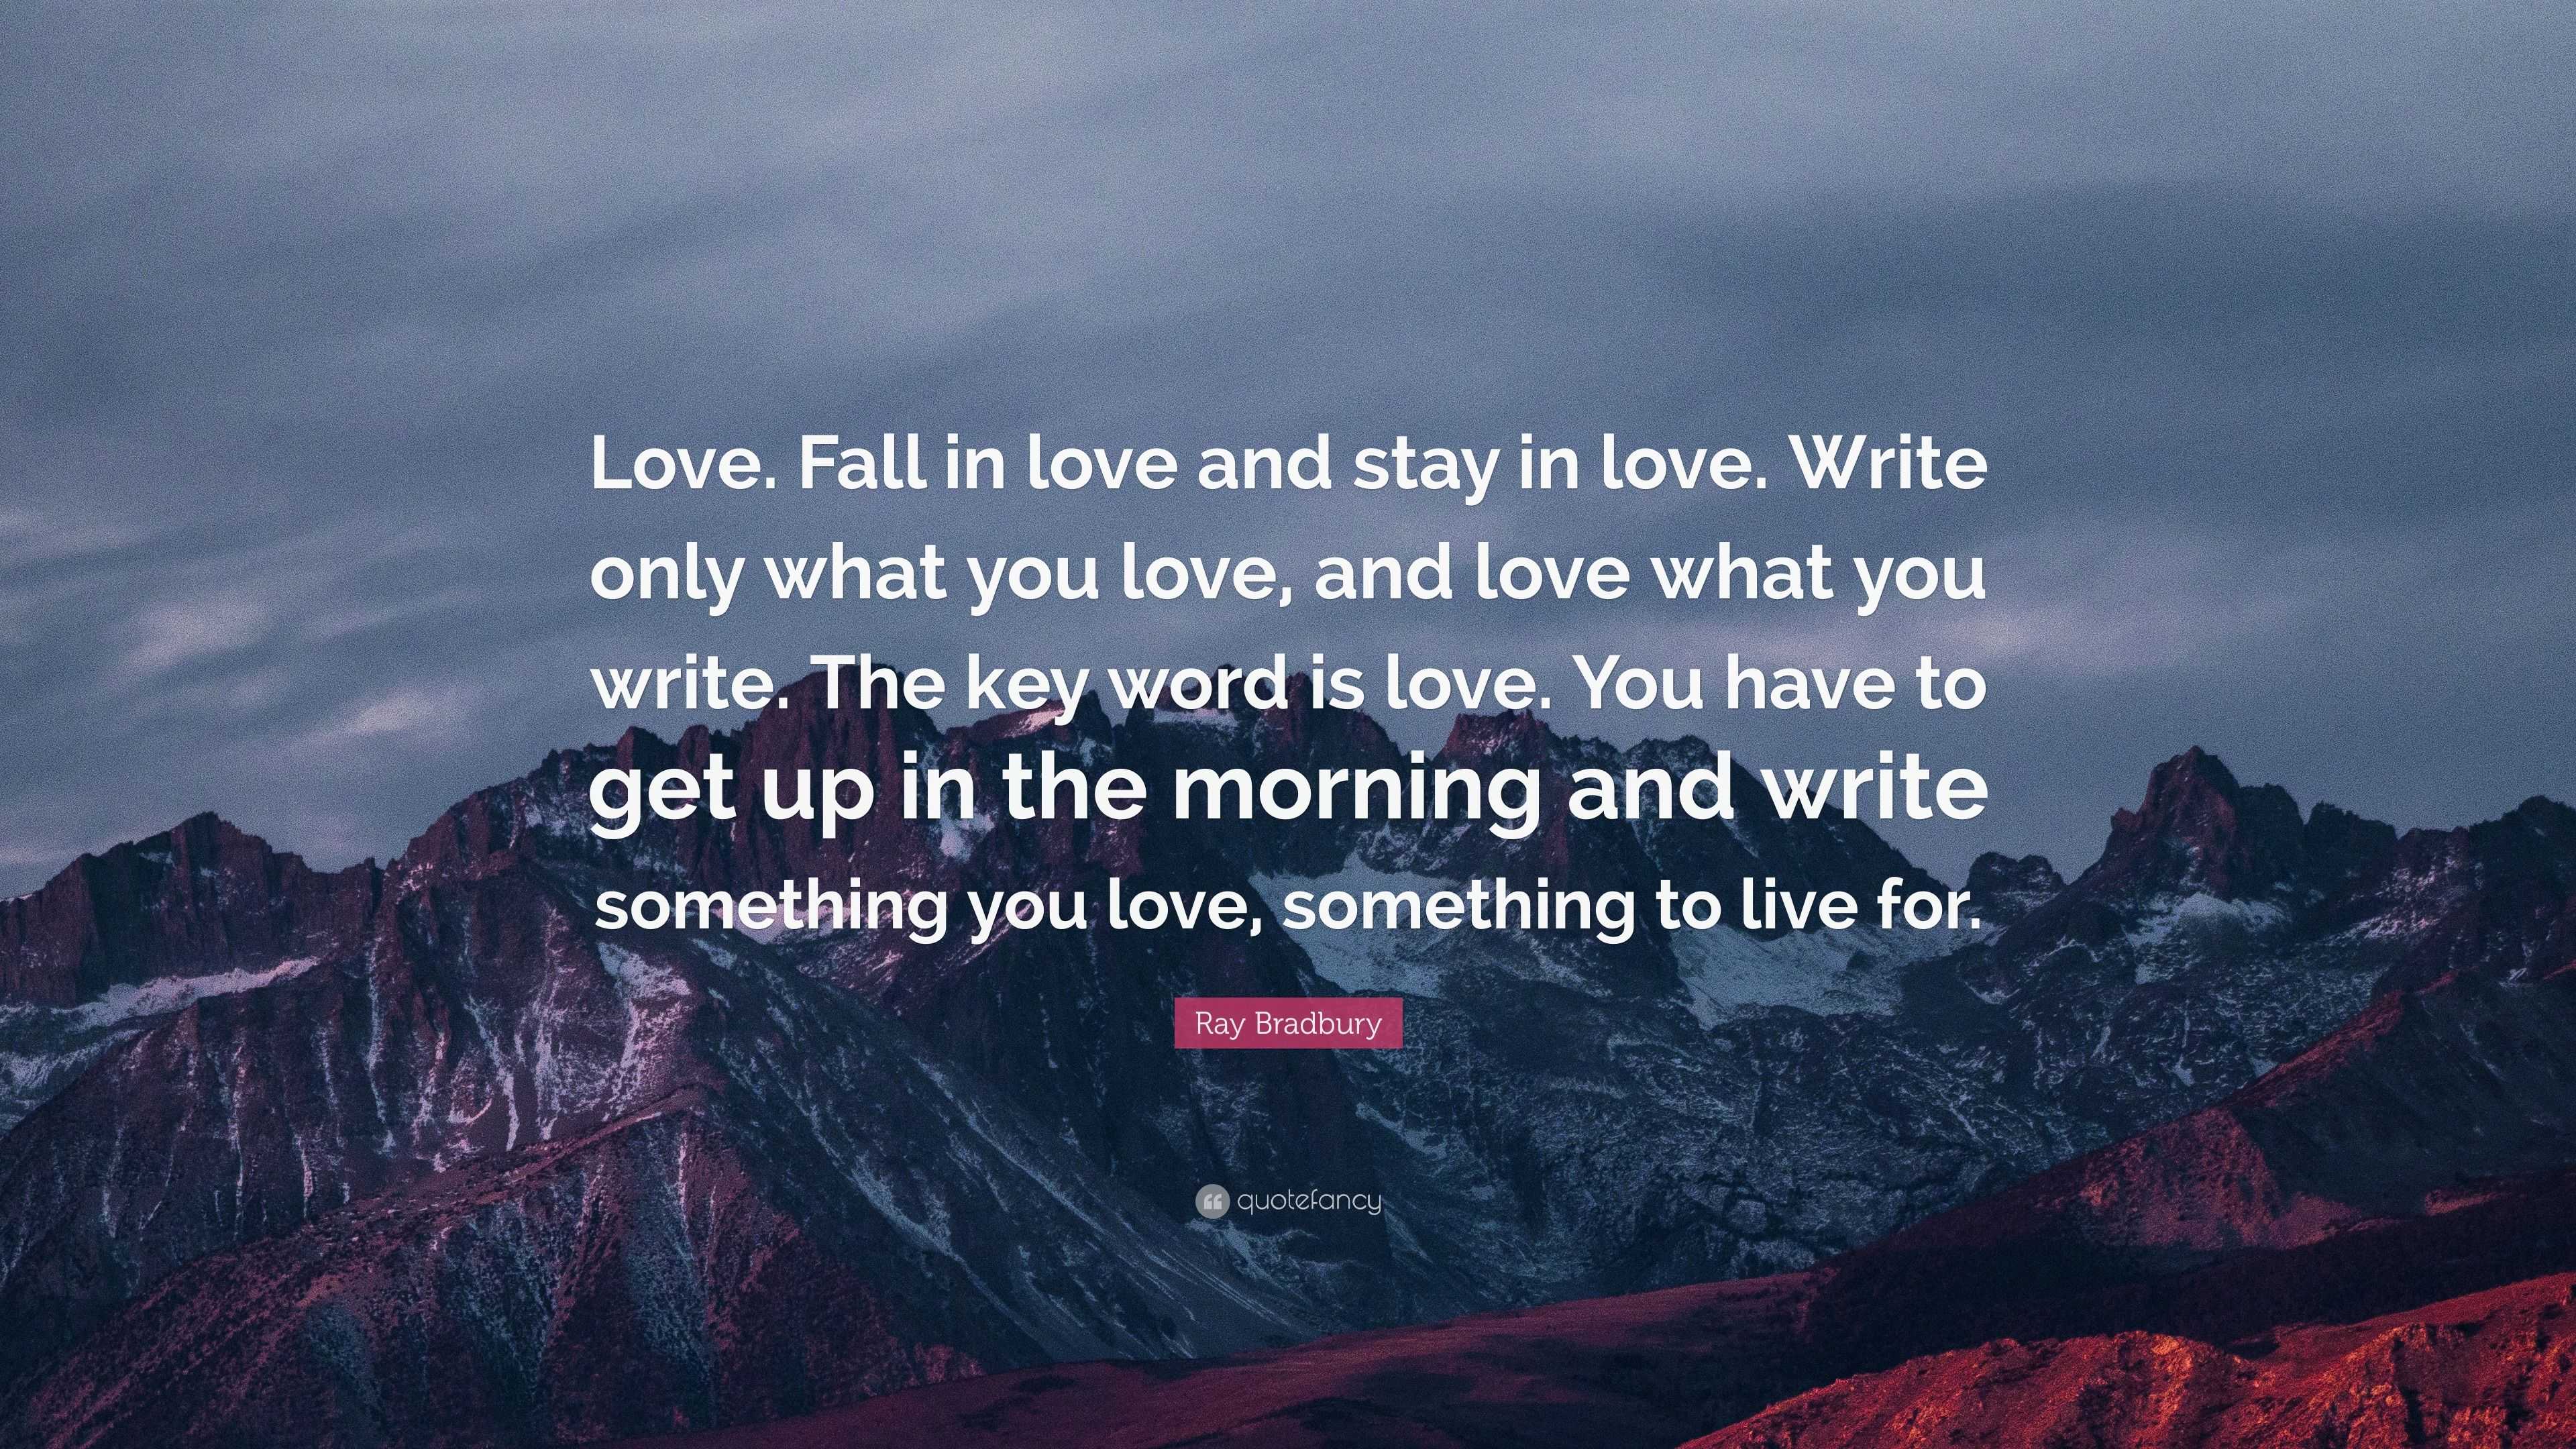 Ray Bradbury Quote “Love. Fall in love and stay in love. Write only